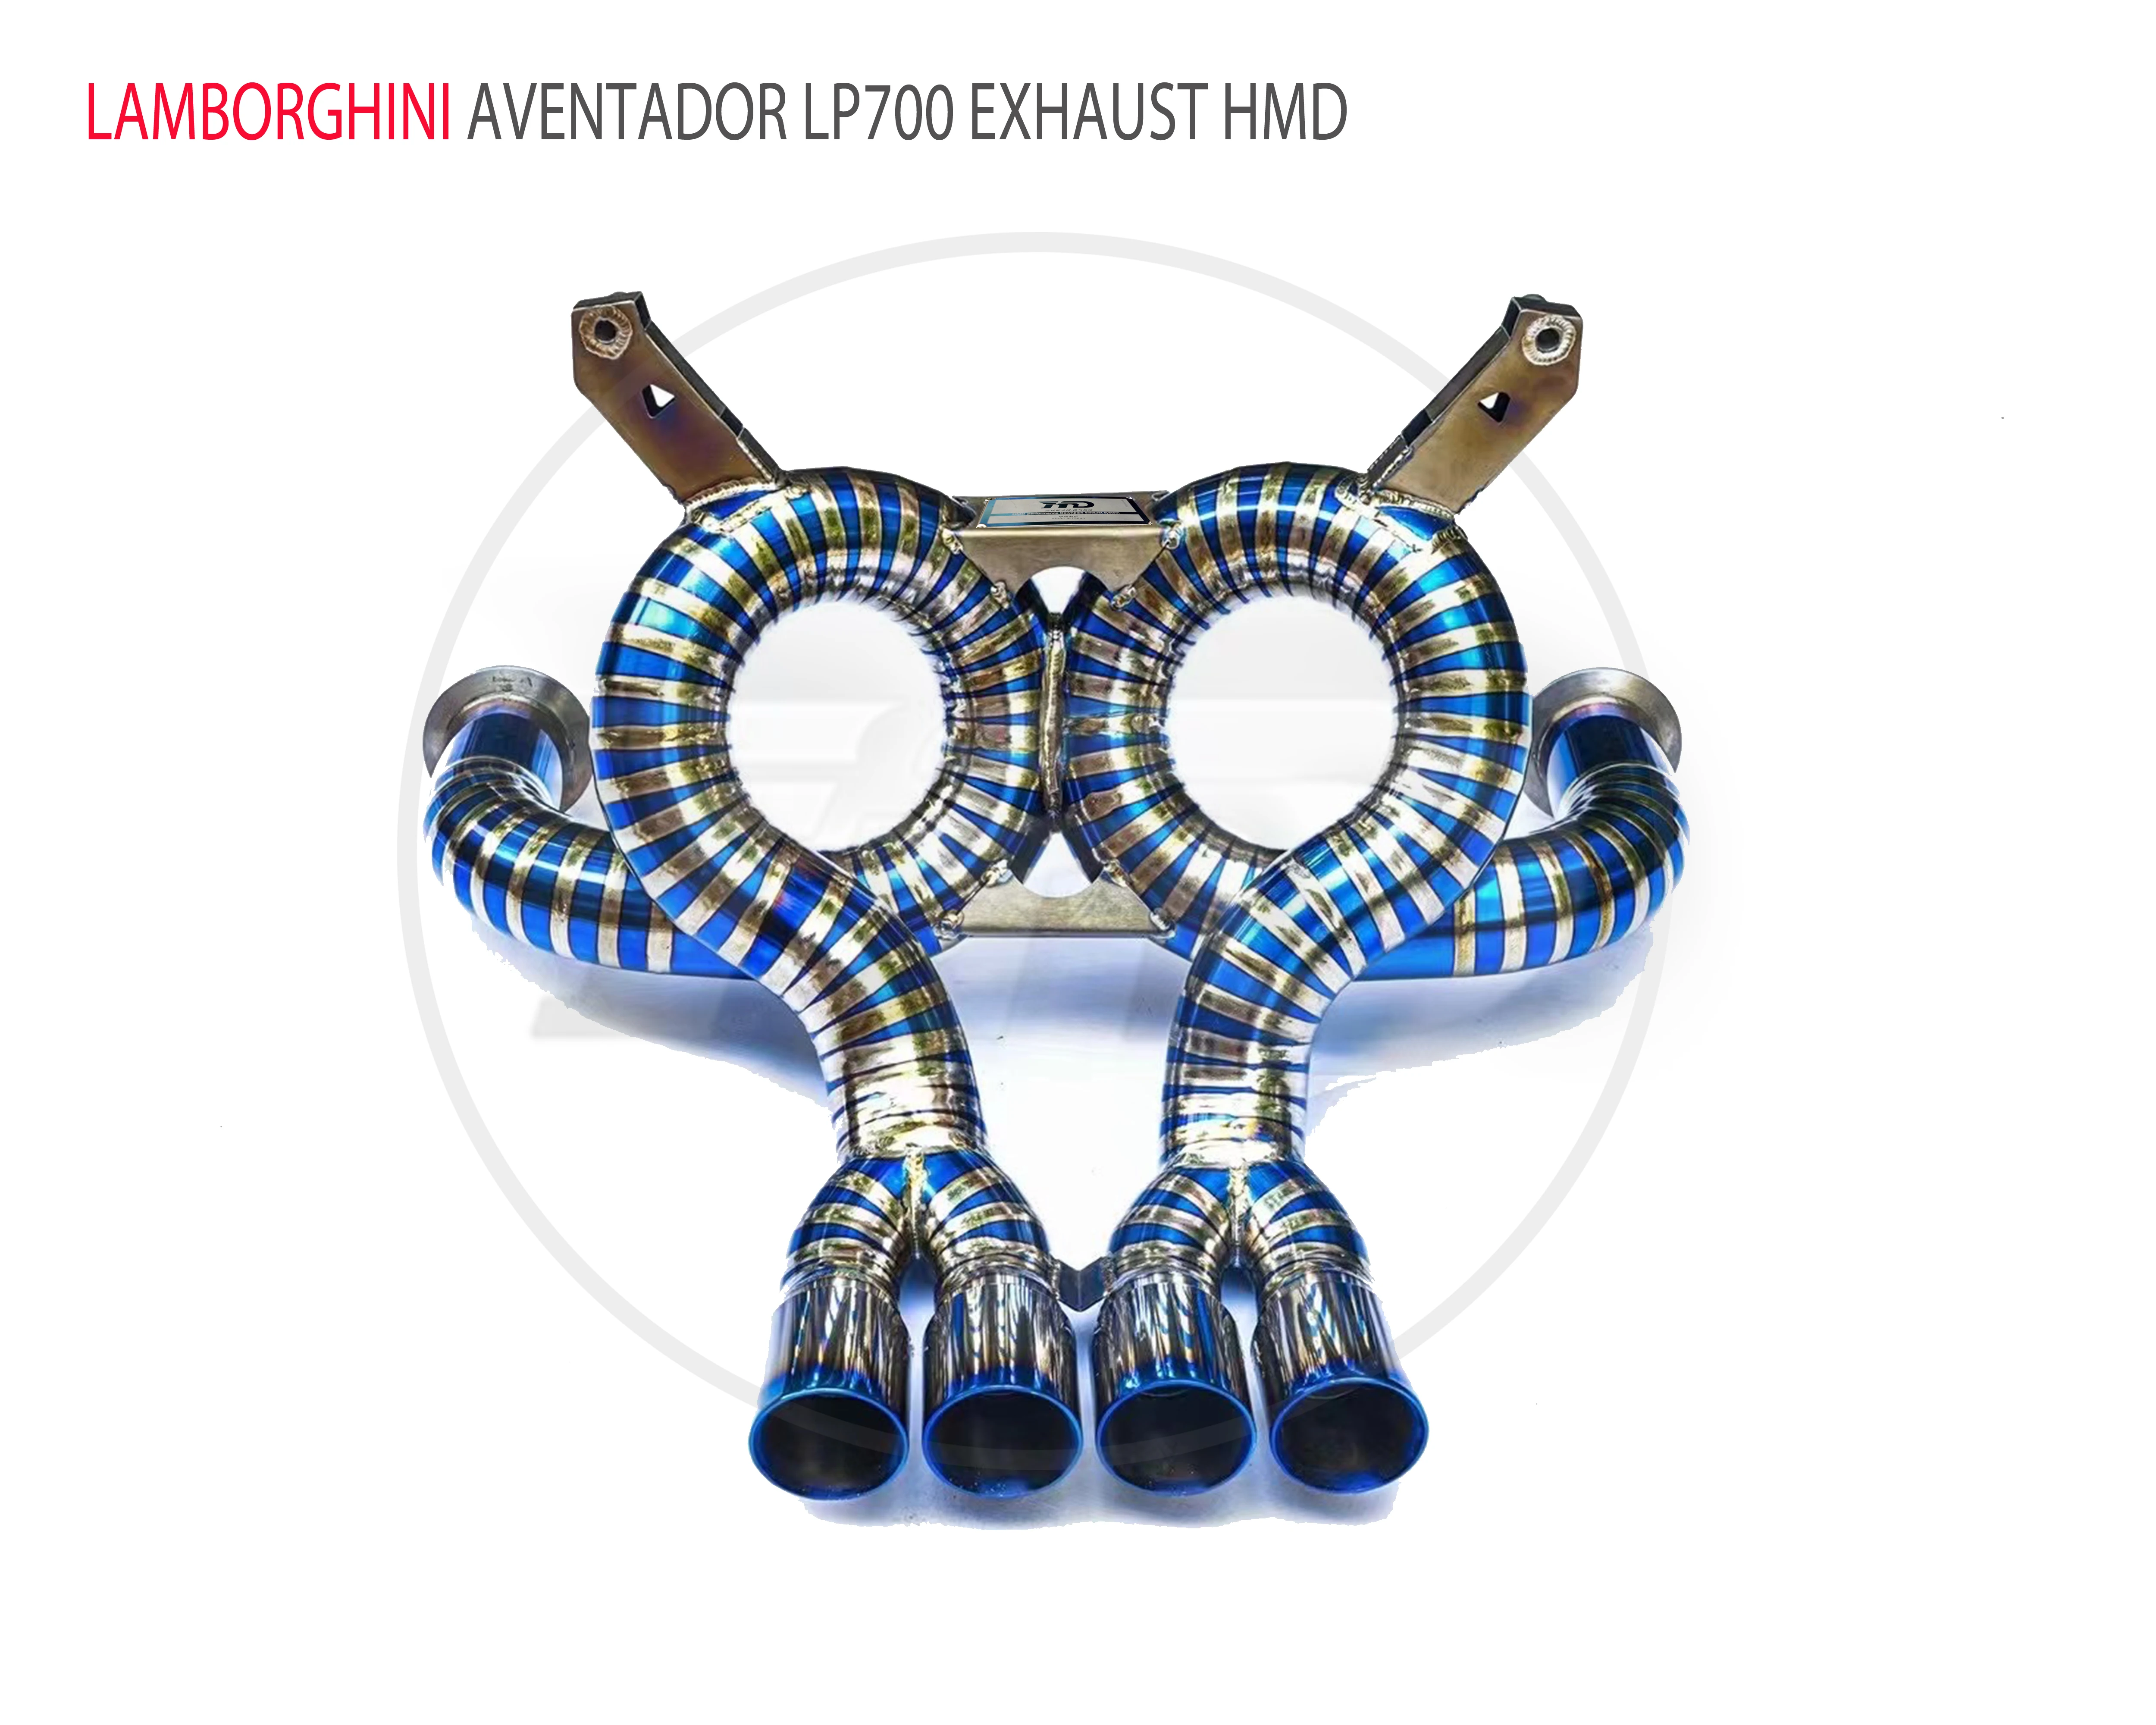 

HMD Titanium Alloy Exhaust Tail Section Downpipe With Valve is Suitable For Lamborghini Aventador LP700 Muffler Modification